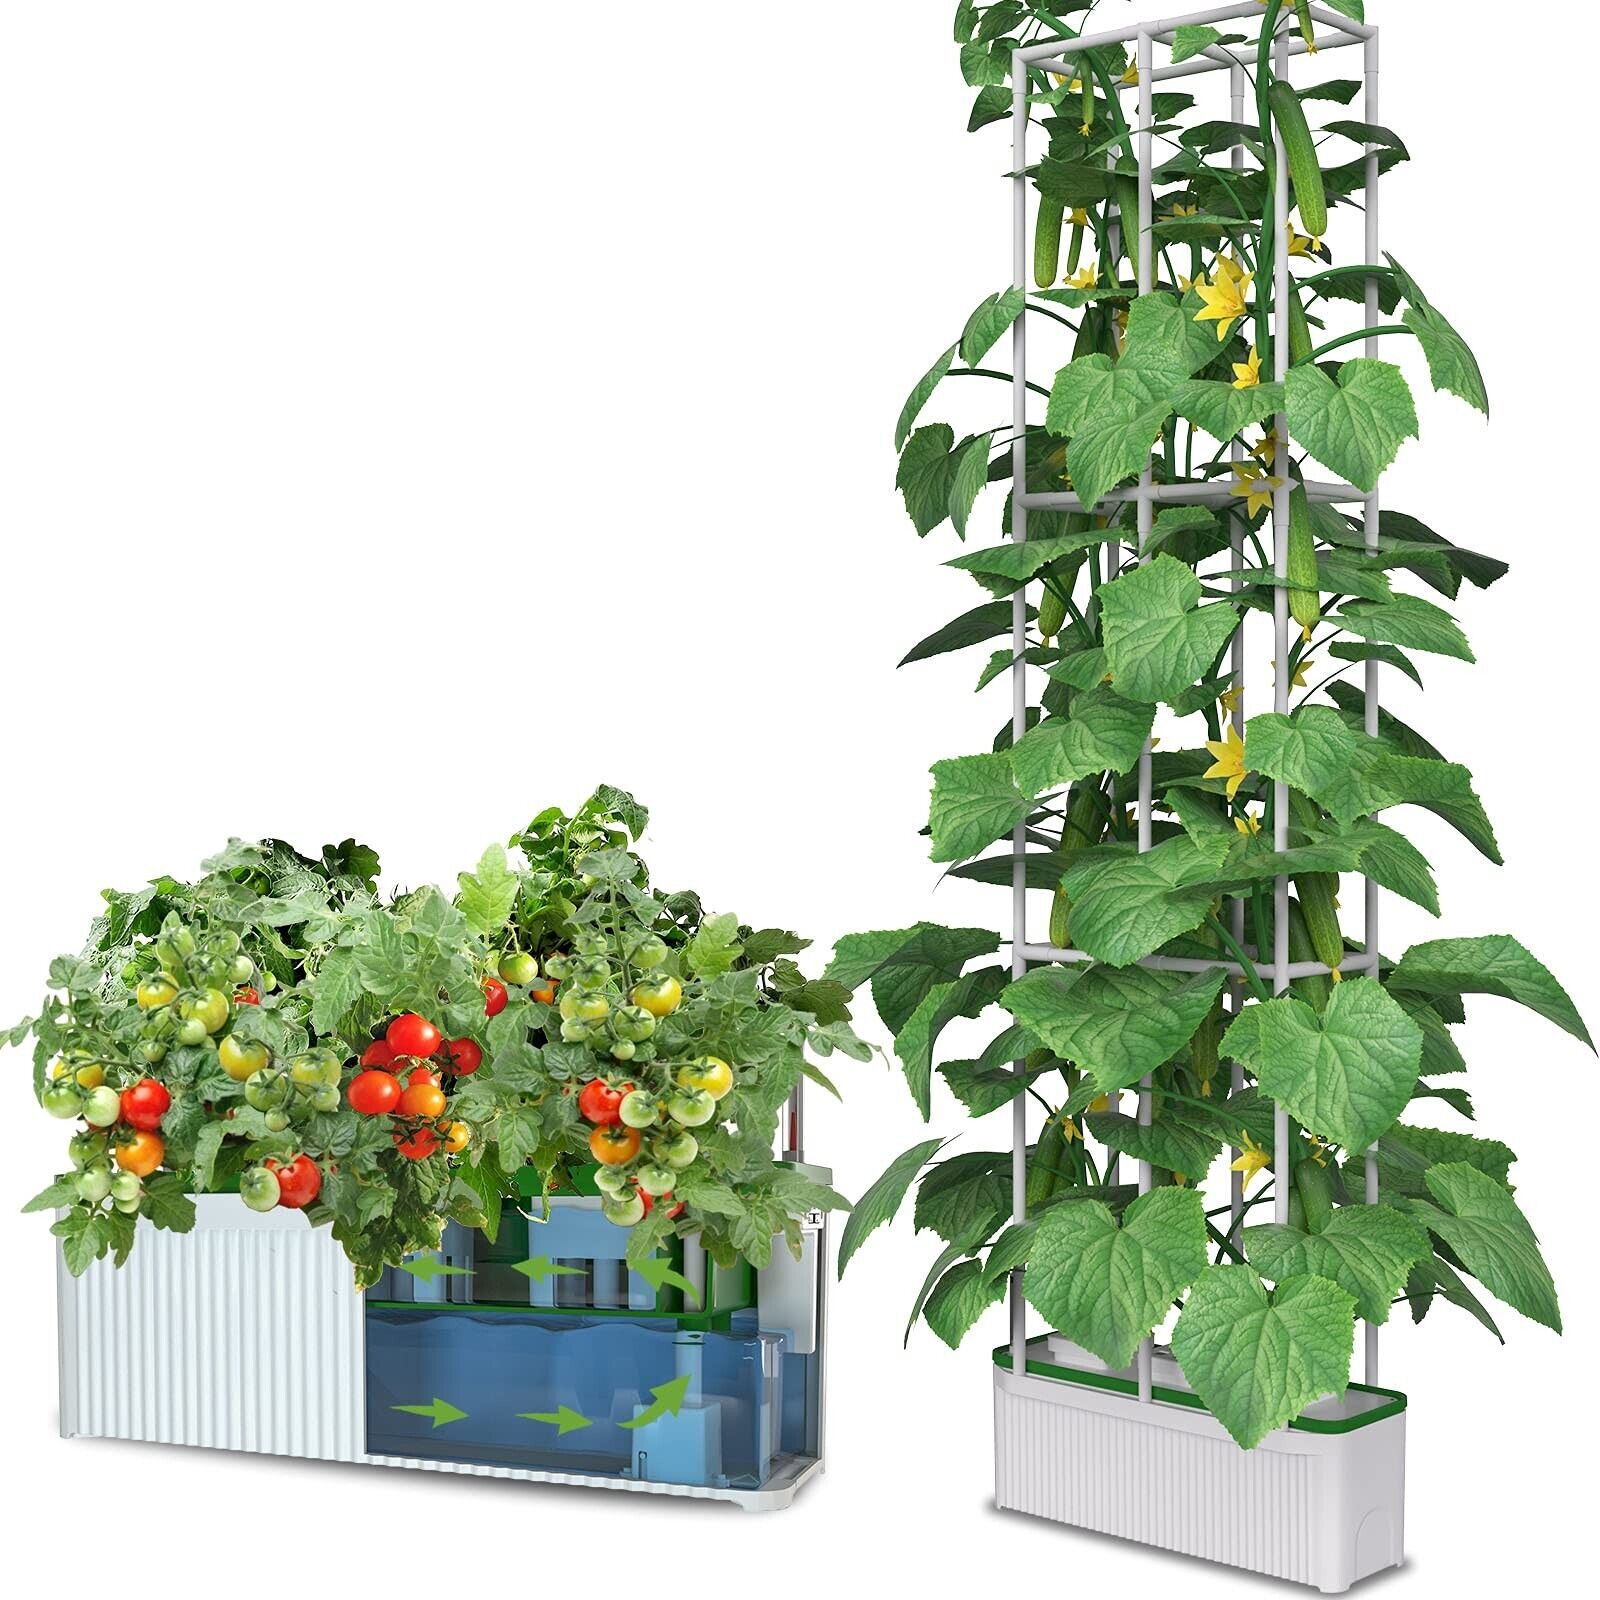 Smart Hydroponic Growing System,7L Indoor Hydroponic Garden Kit for Herb,Zucc...